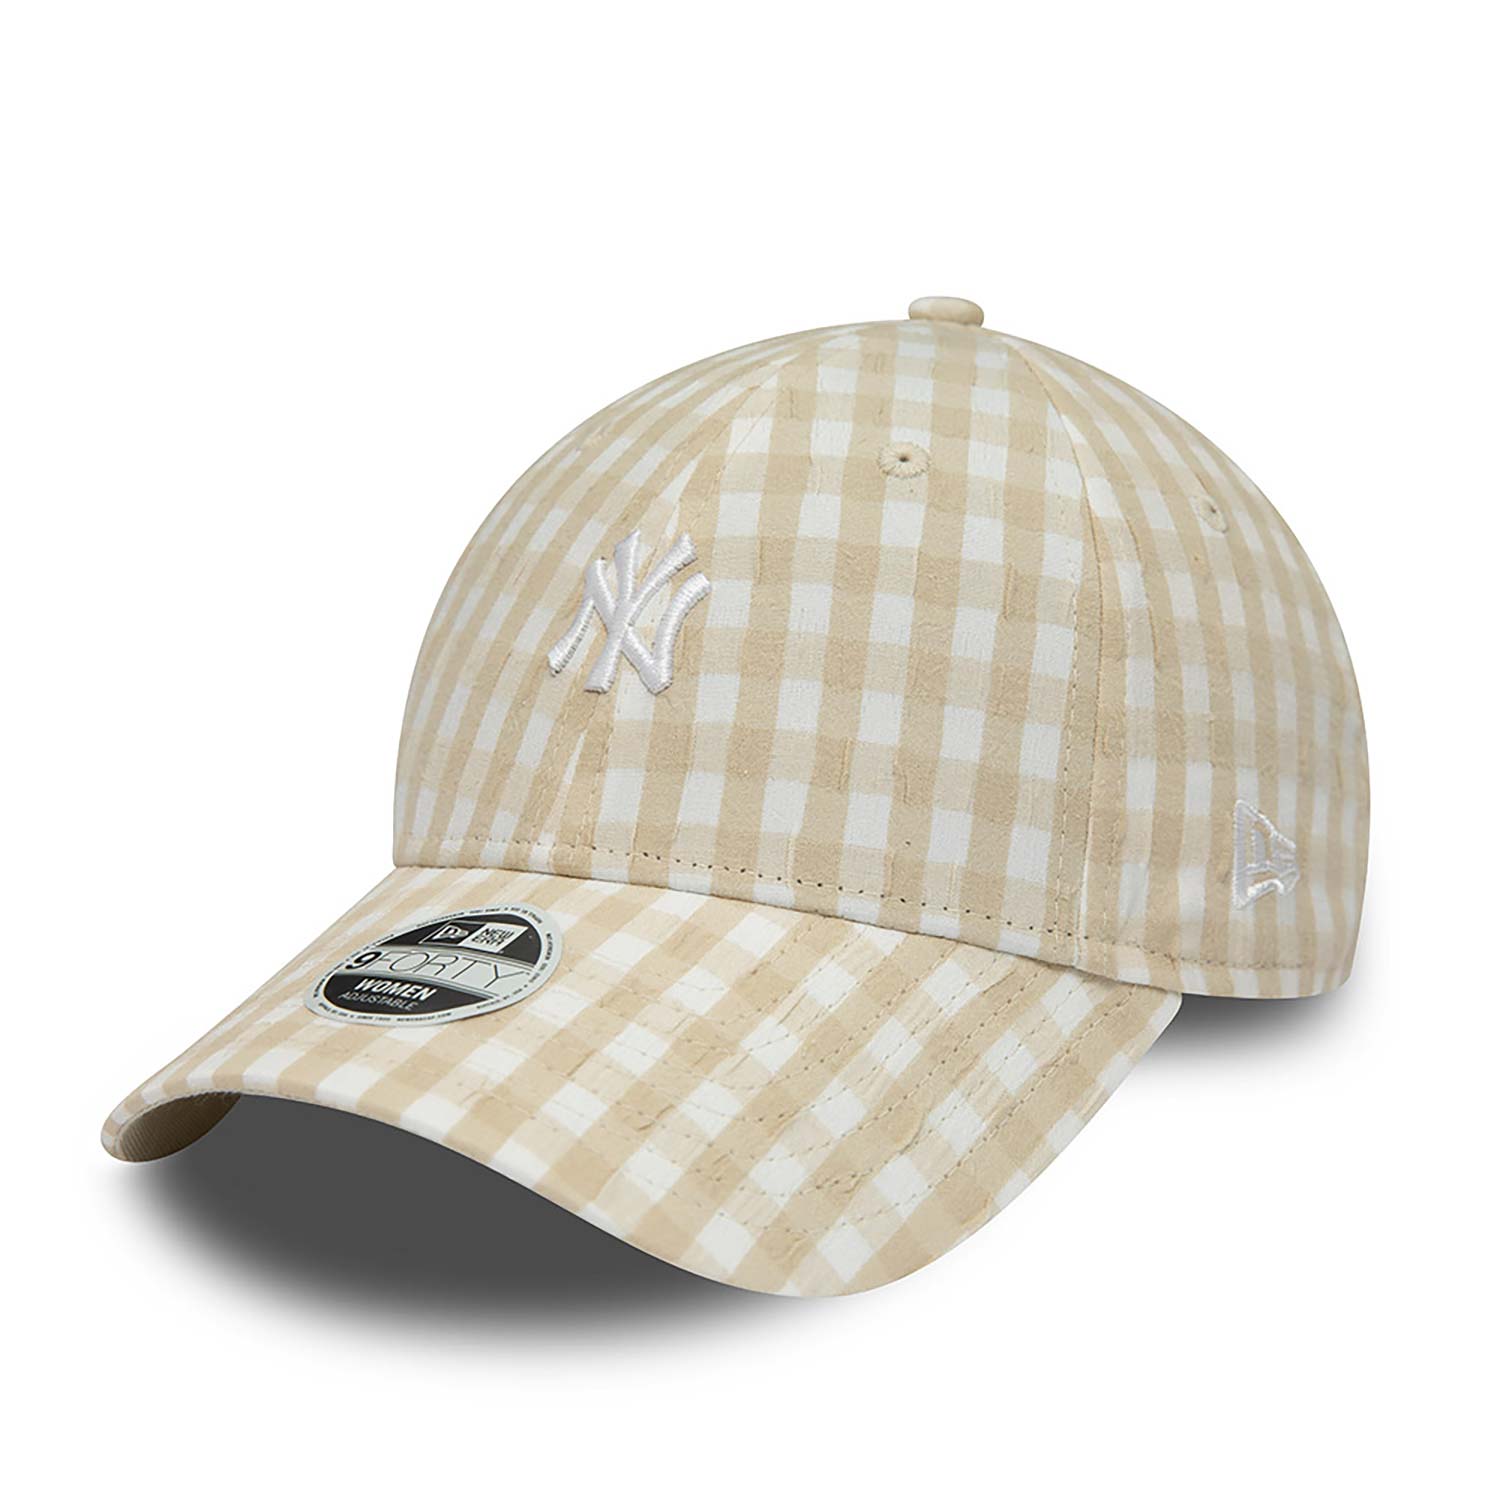 New York Yankees Womens Gingham Stone 9FORTY Adjustable Cap